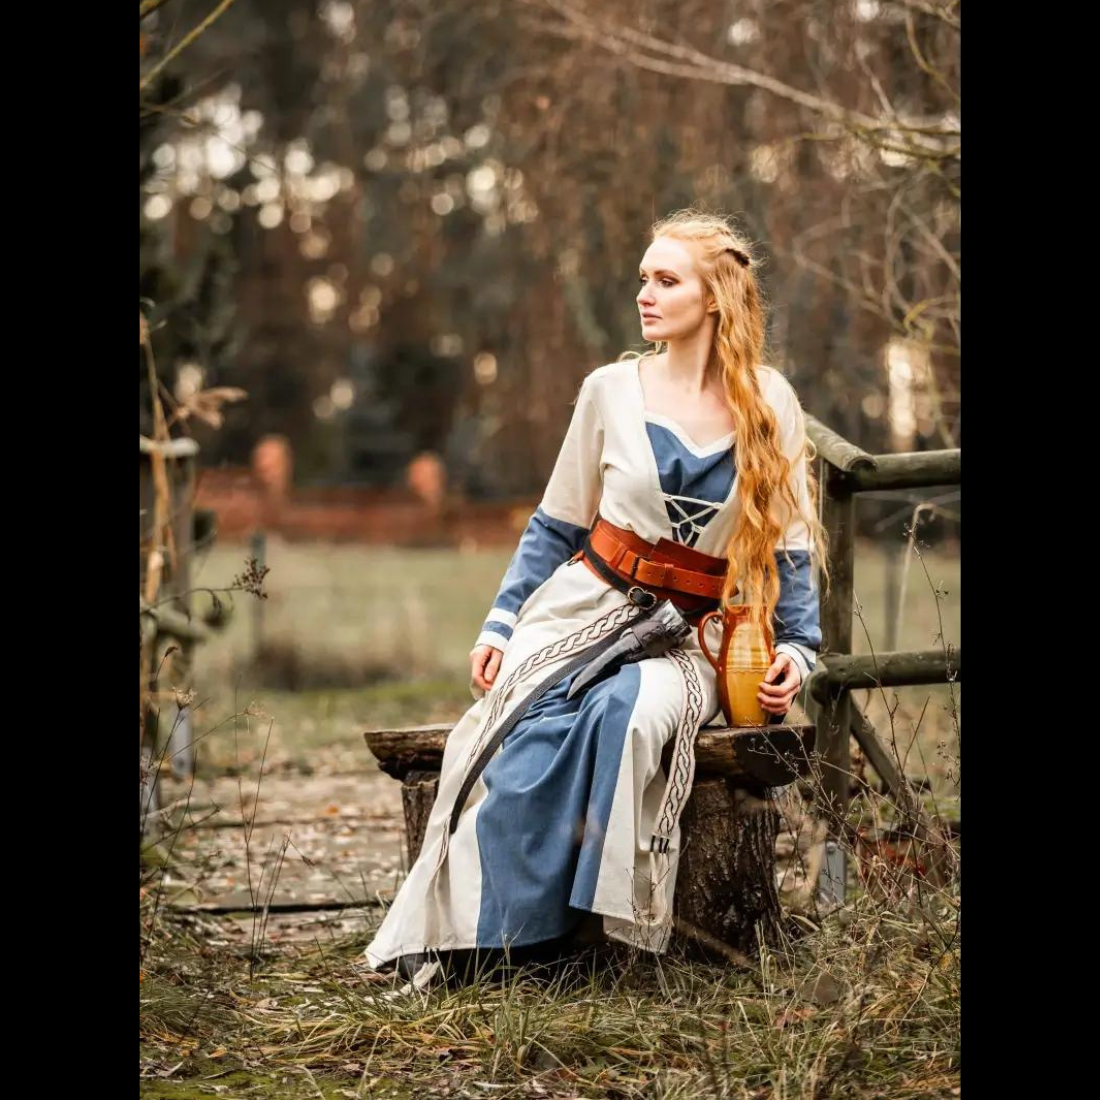 Renaissance Style Dress - Exquisite Long Sleeves in Natural and Blue, Featuring Traditional Lacing